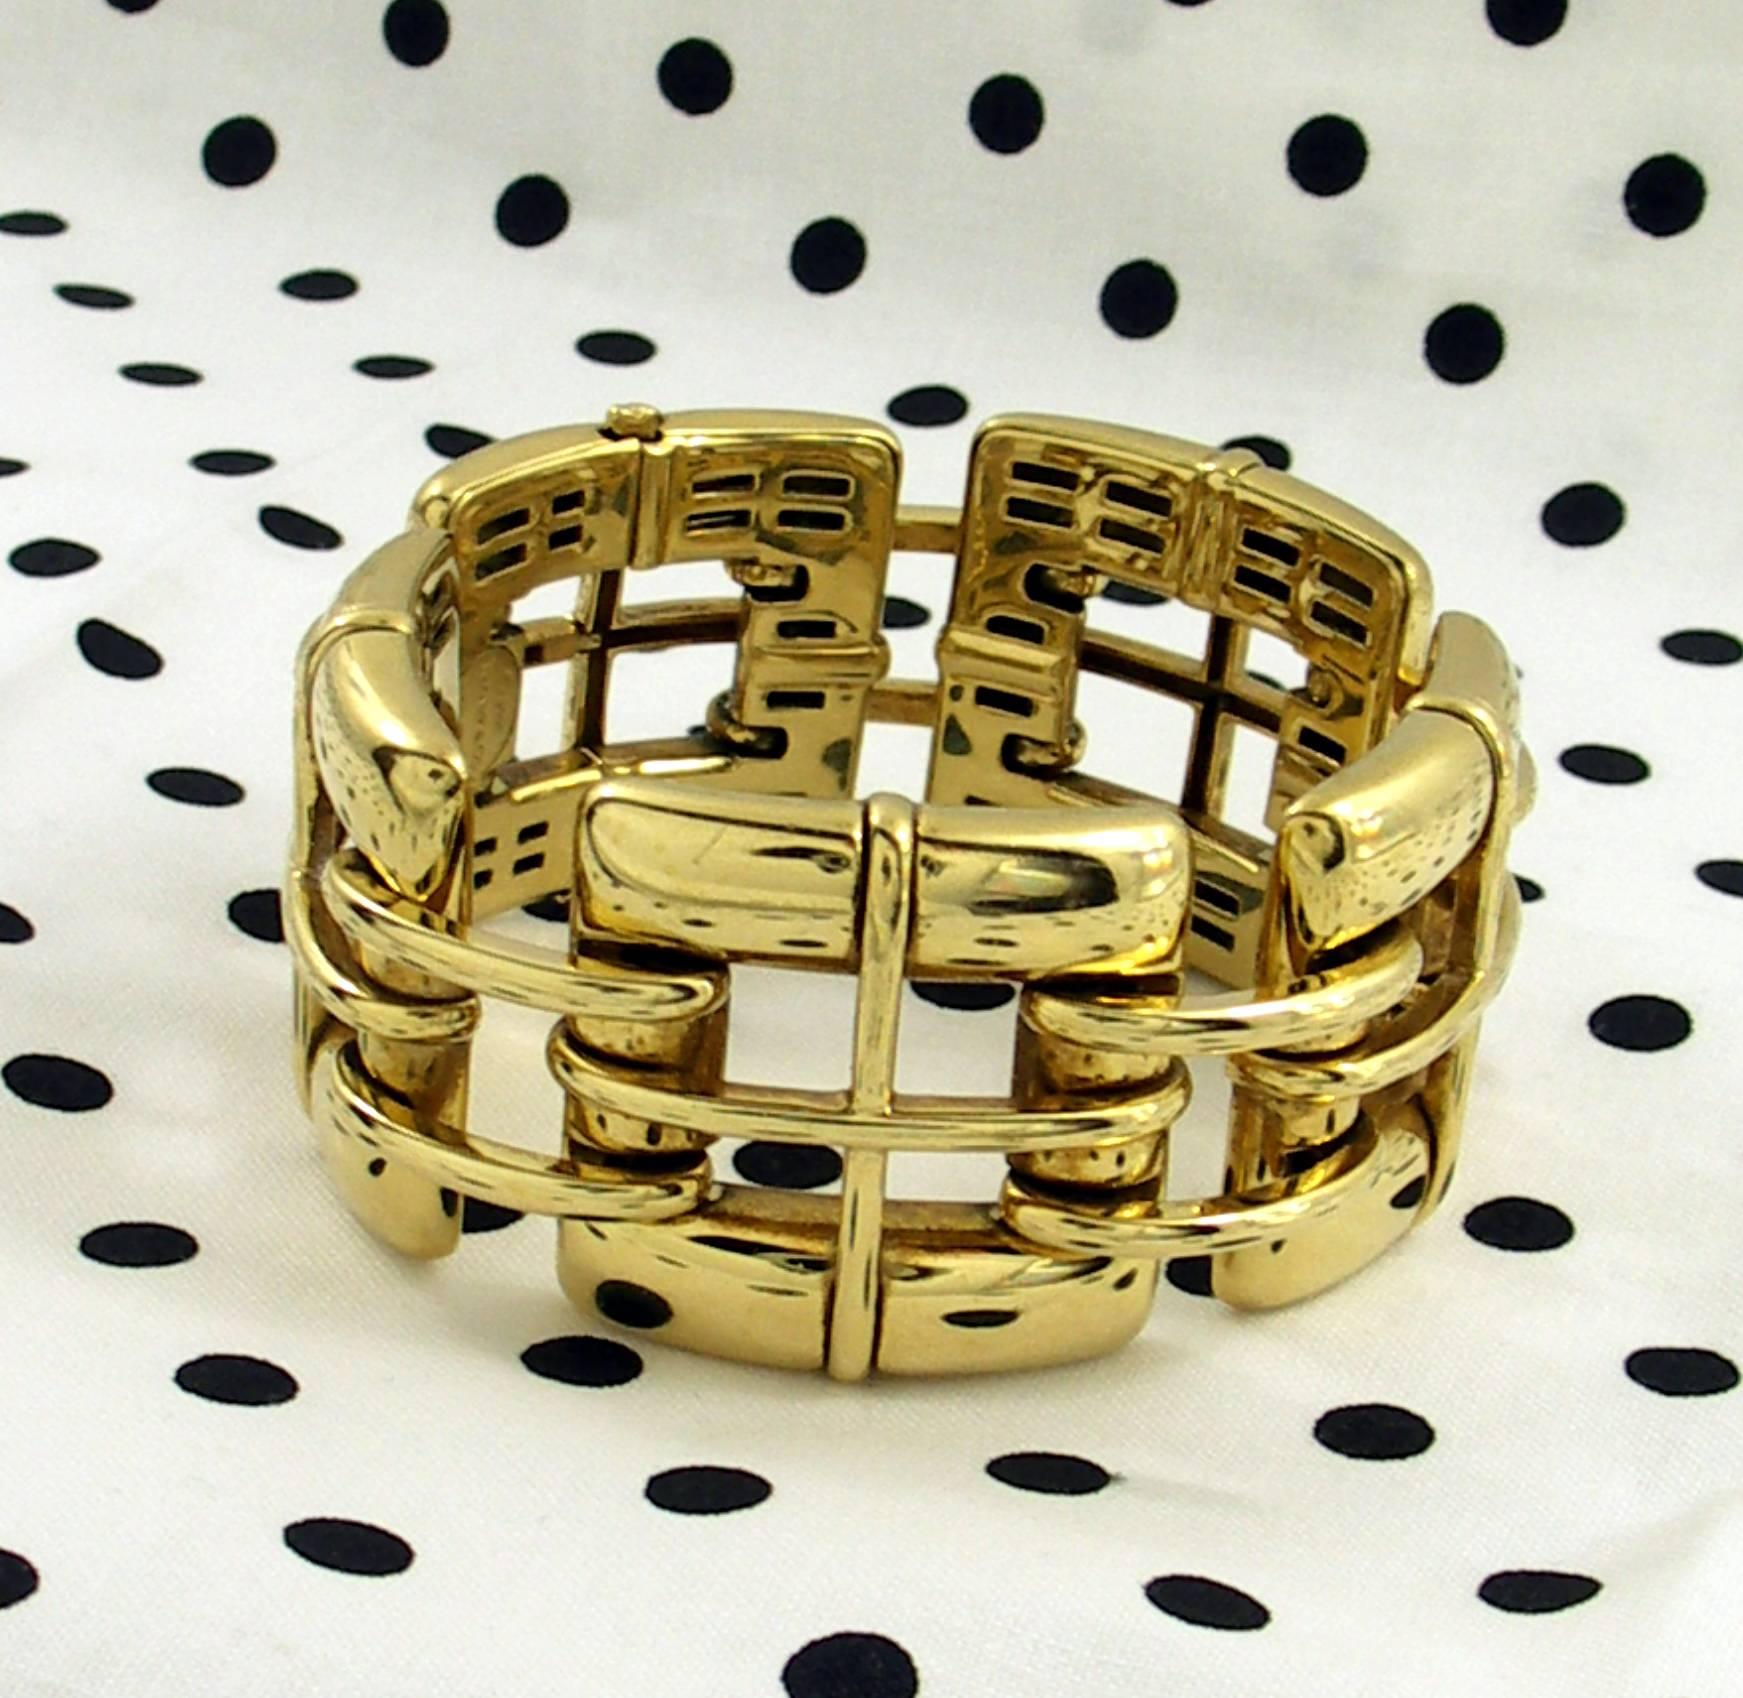 One ladies 18 karat yellow gold bracelet measuring  1 1/4 inches wide and 7 1/2 inches long. This stylish bracelet is comprised of five open links, known as the Biscayne model by Tiffany and Co.